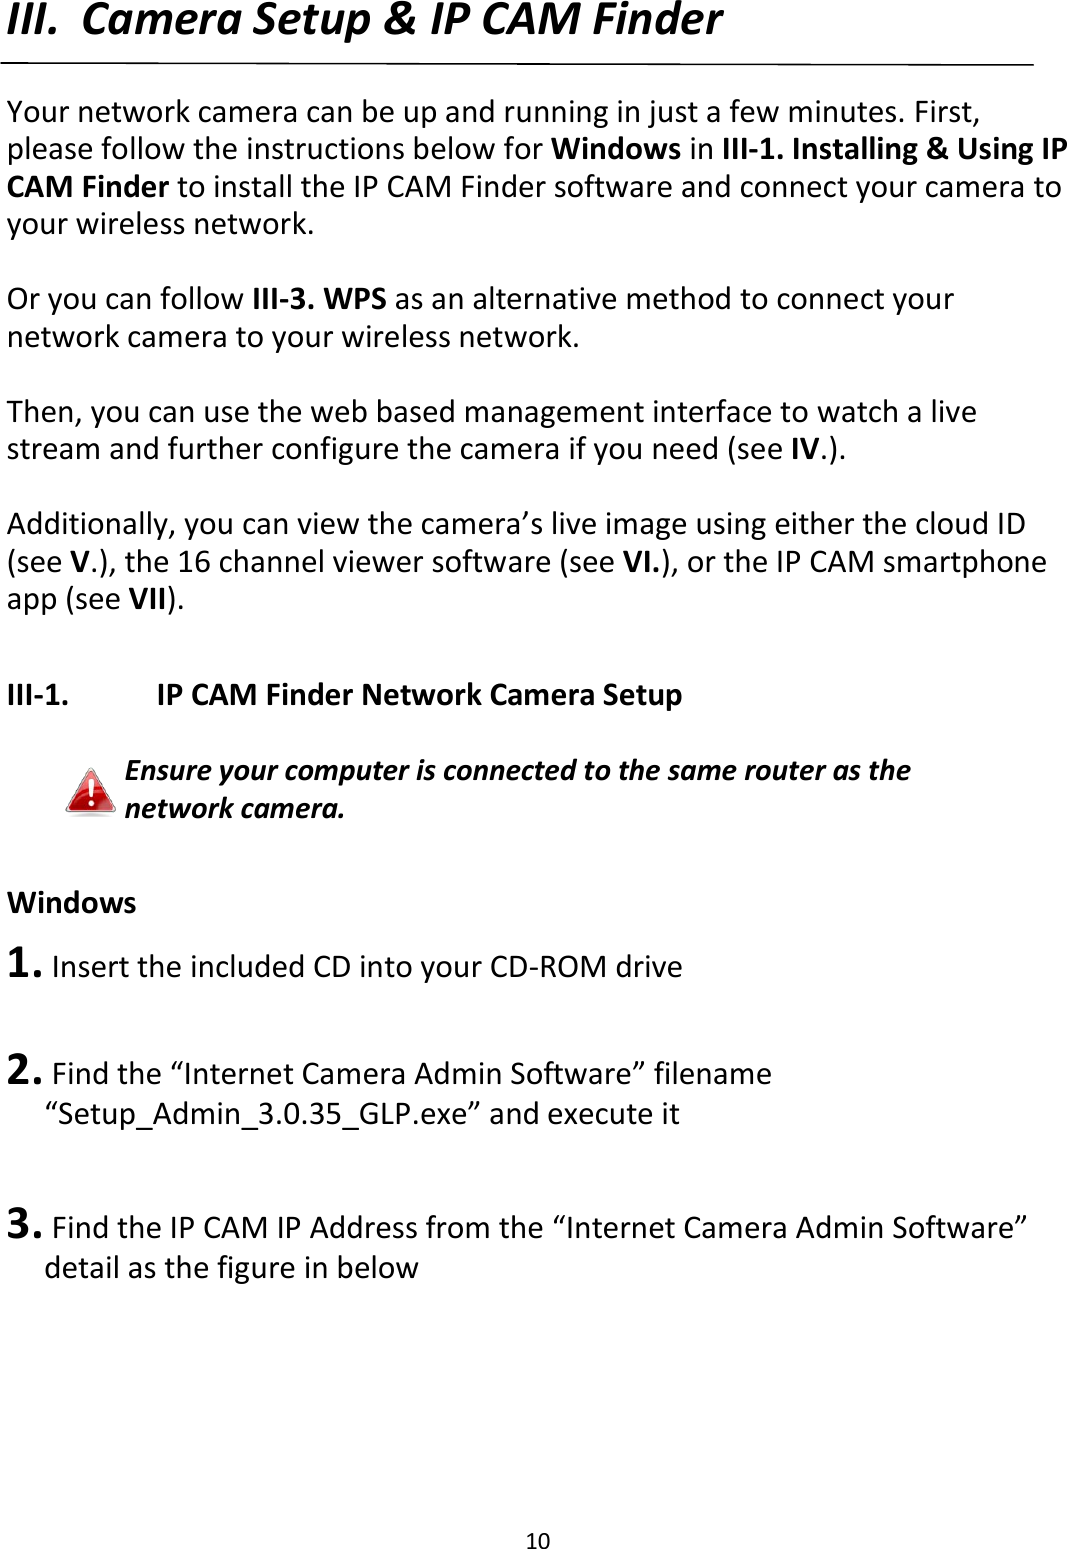 10  III. Camera Setup &amp; IP CAM Finder  Your network camera can be up and running in just a few minutes. First, please follow the instructions below for Windows in III-1. Installing &amp; Using IP CAM Finder to install the IP CAM Finder software and connect your camera to your wireless network.  Or you can follow III-3. WPS as an alternative method to connect your network camera to your wireless network.  Then, you can use the web based management interface to watch a live stream and further configure the camera if you need (see IV.).   Additionally, you can view the camera’s live image using either the cloud ID (see V.), the 16 channel viewer software (see VI.), or the IP CAM smartphone app (see VII).  III-1.    IP CAM Finder Network Camera Setup  Ensure your computer is connected to the same router as the network camera.  Windows 1.  Insert the included CD into your CD-ROM drive   2.  Find the “Internet Camera Admin Software” filename “Setup_Admin_3.0.35_GLP.exe” and execute it  3.  Find the IP CAM IP Address from the “Internet Camera Admin Software” detail as the figure in below 